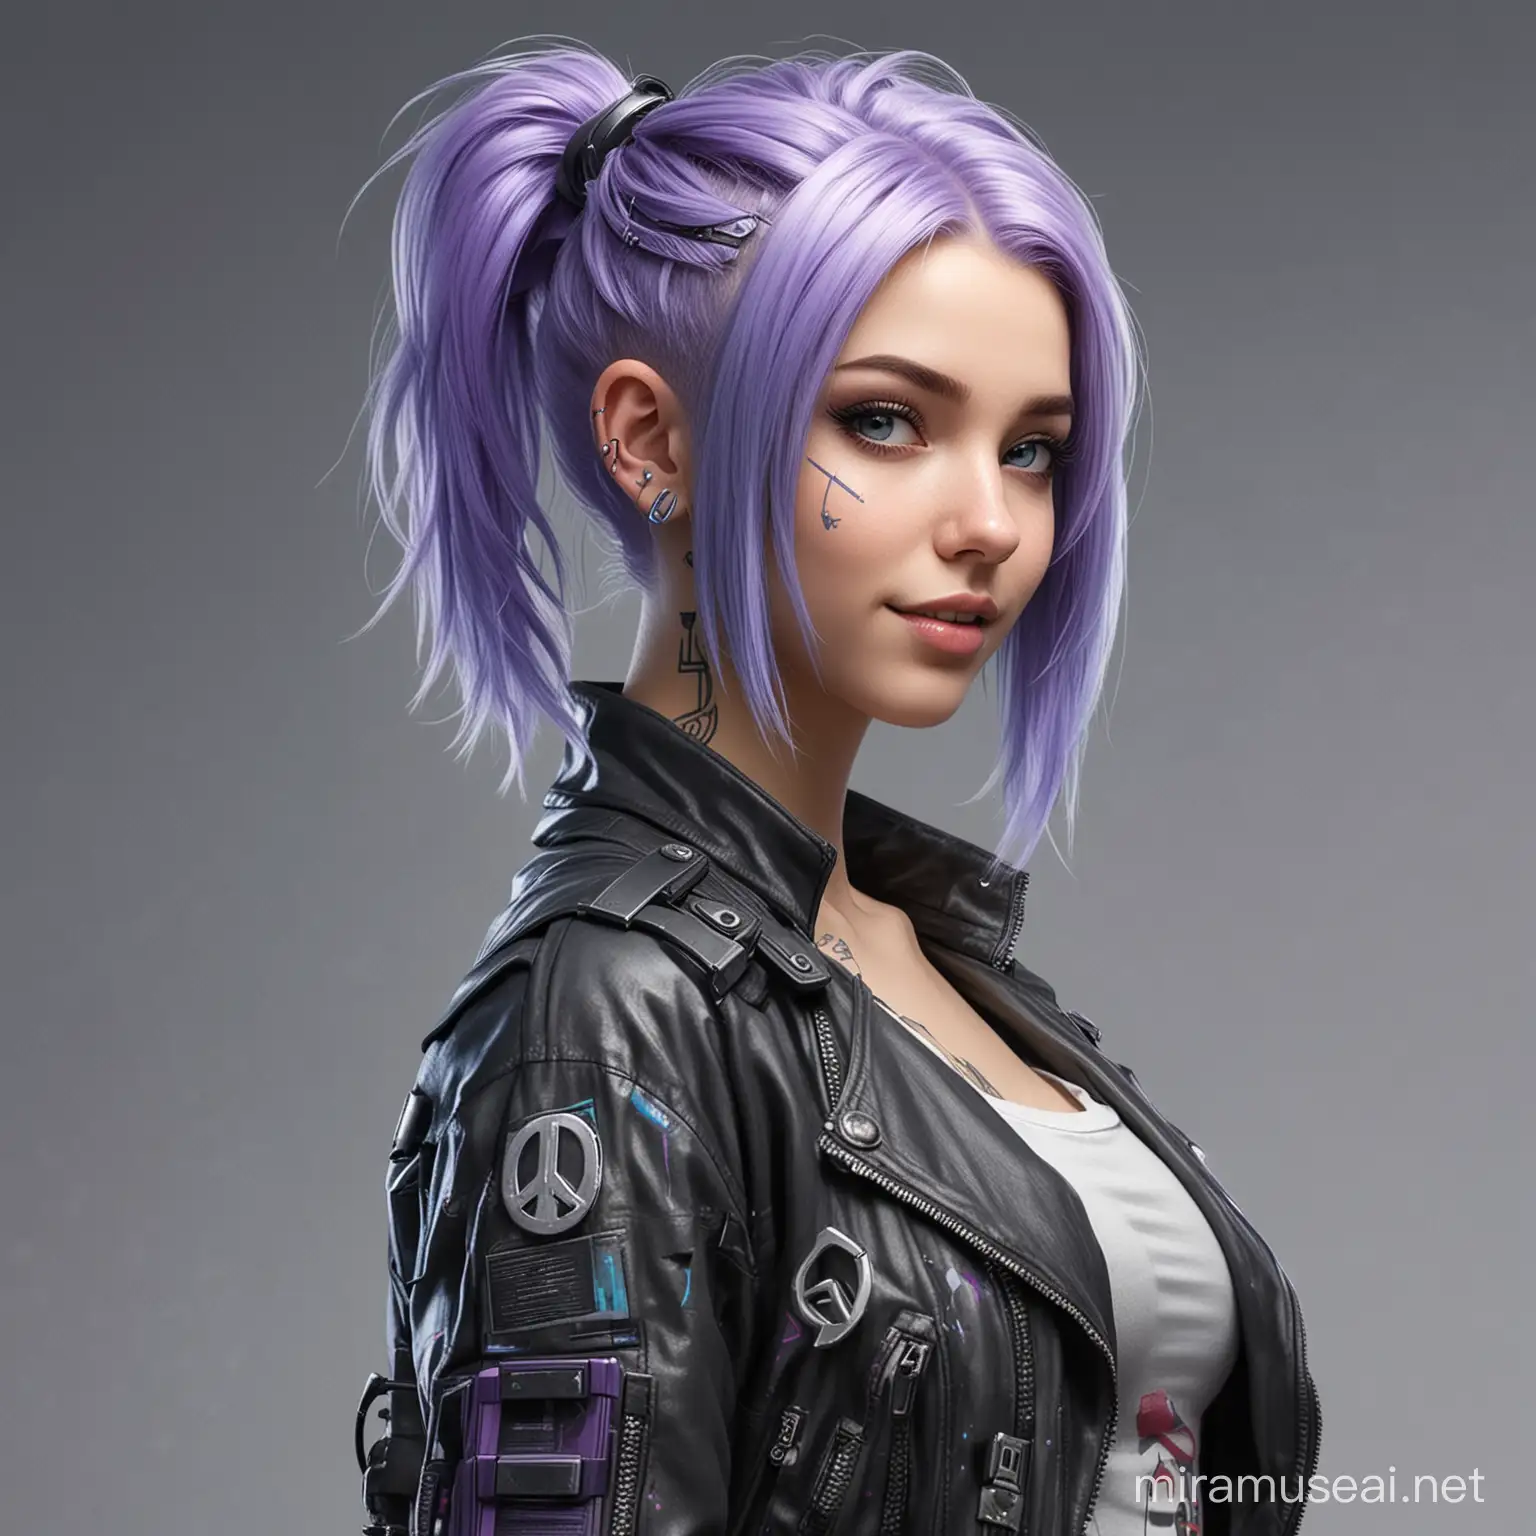 Sly Smiling Cyberpunk Teen with Blue and Purple Hair Posing in Peace Sign Gesture